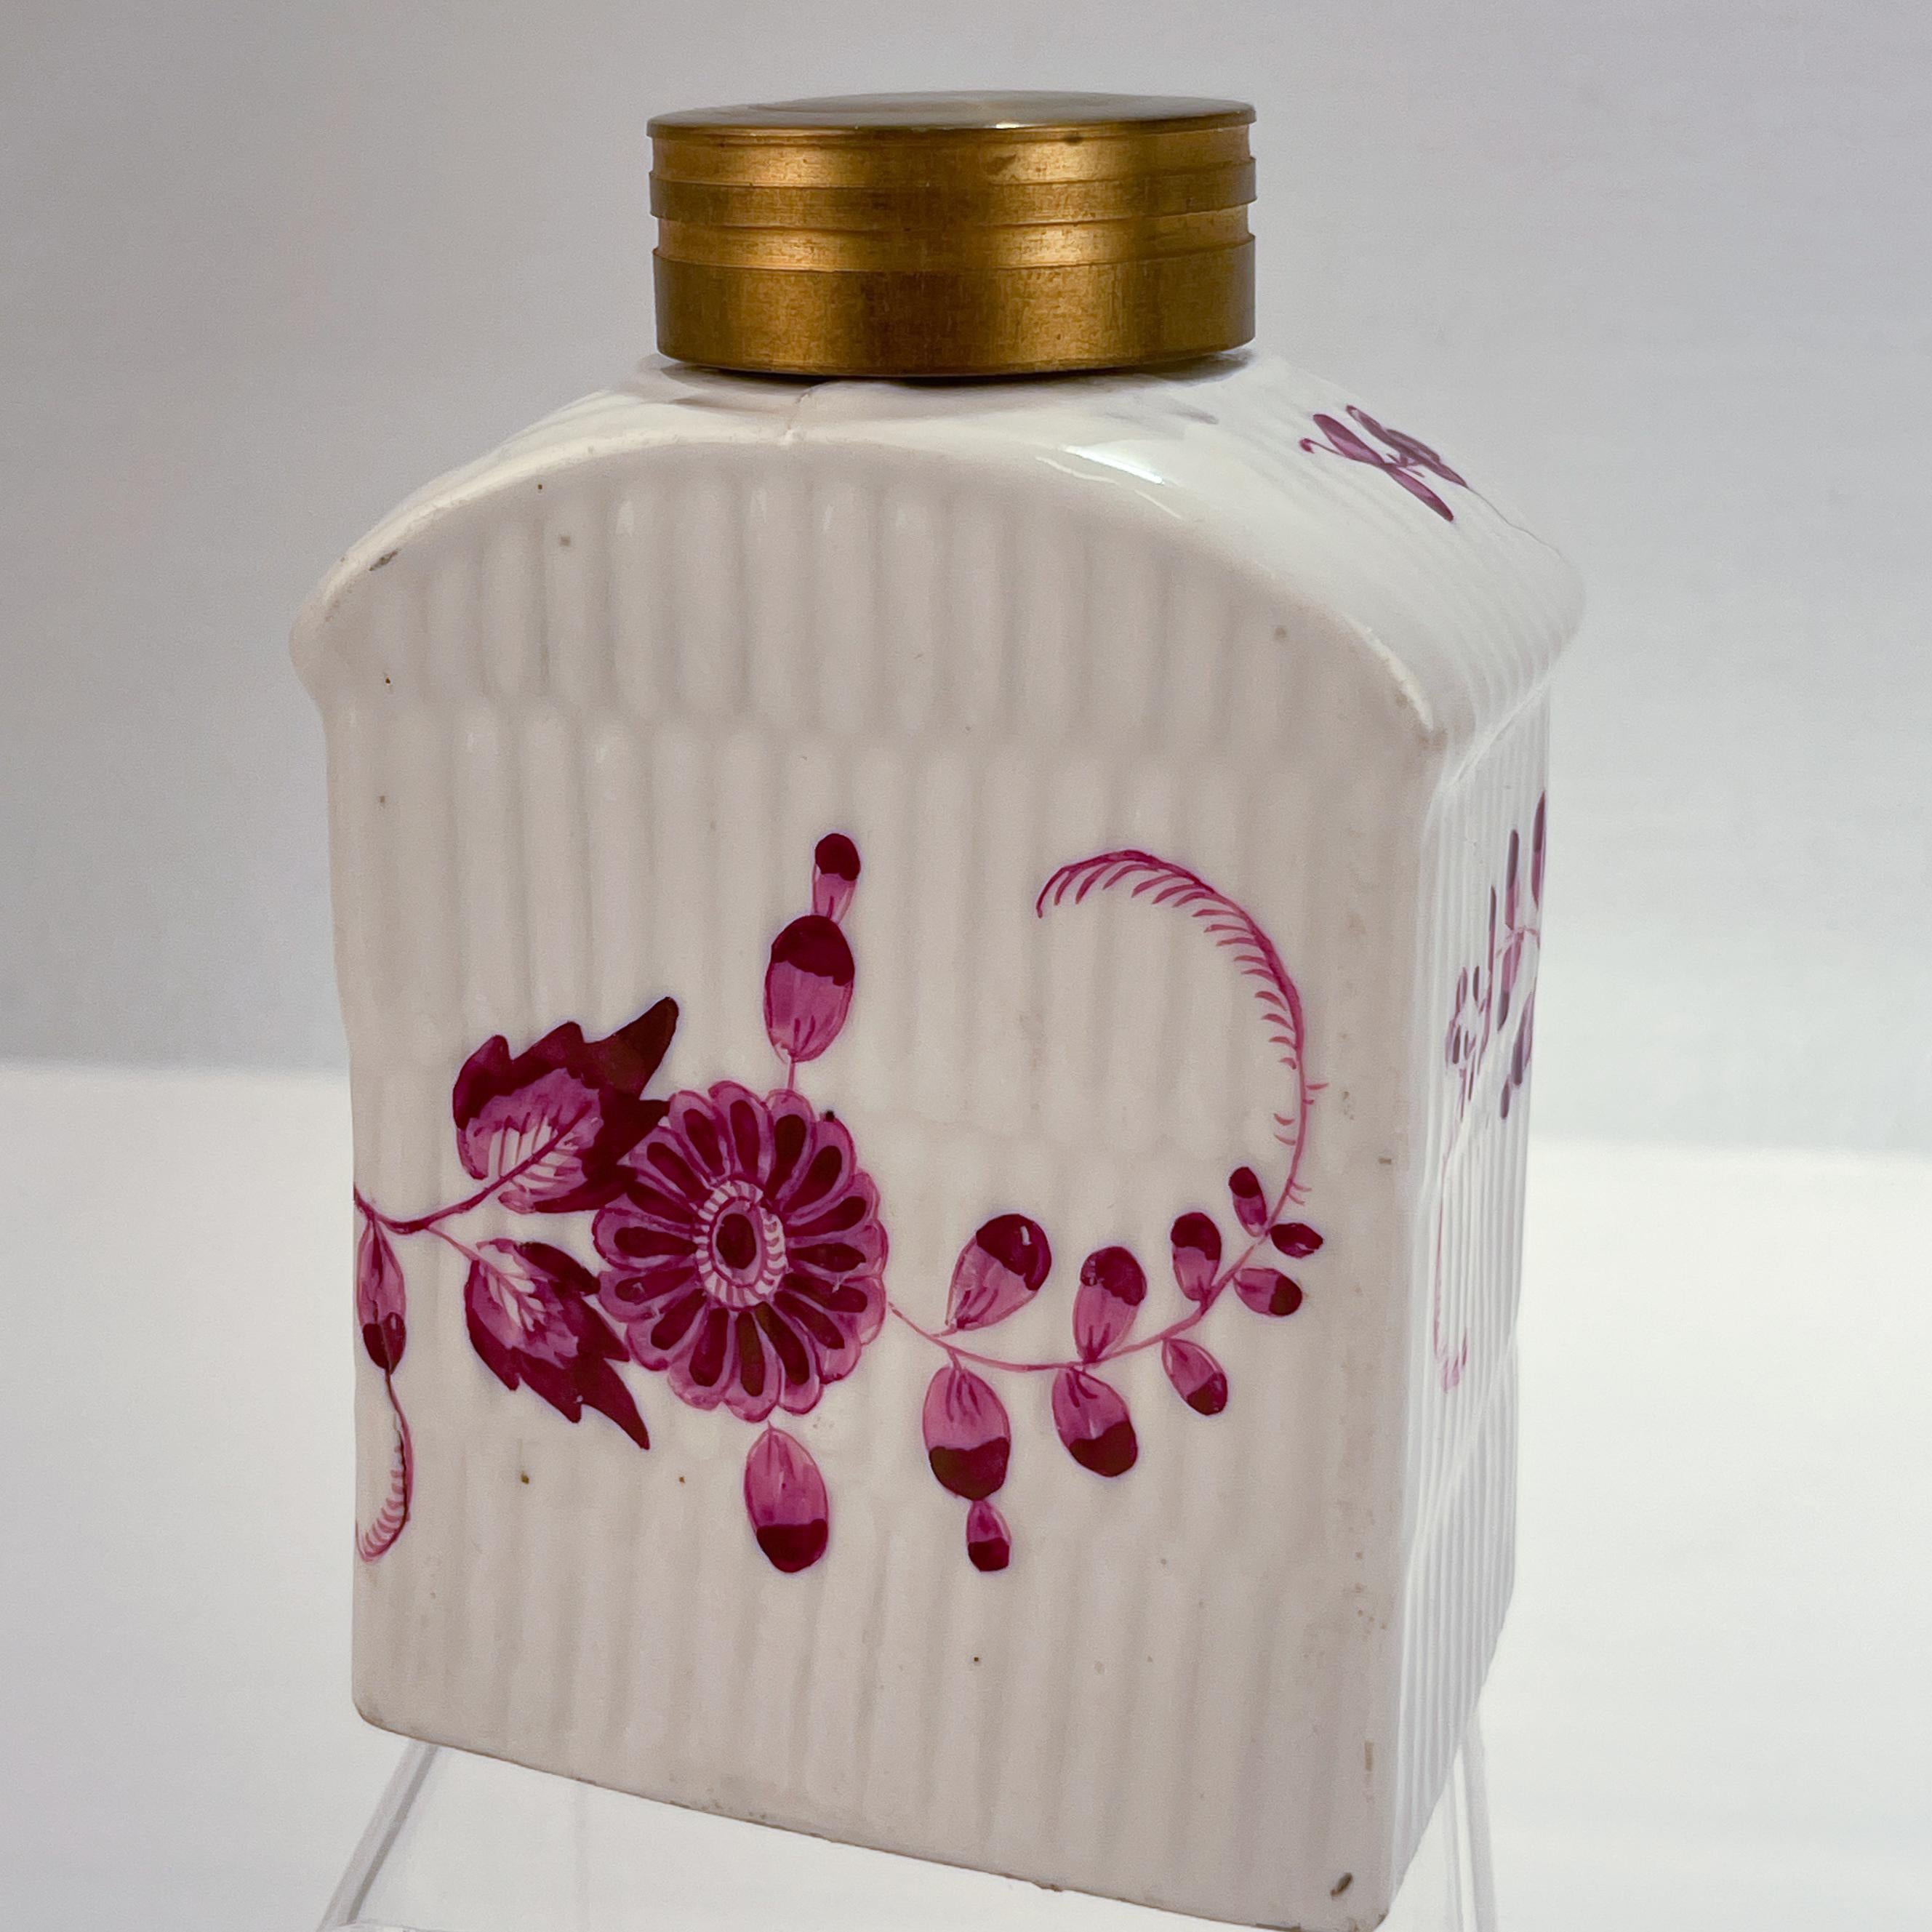 A fine Meissen Porcelain tea caddy.

With a reeded body and purple Indian hand painted decoration.

With gilt decoration and a later associated brass lid.

From the Marcolini period.

Simply a great tea caddy!

Date:
Late 18th